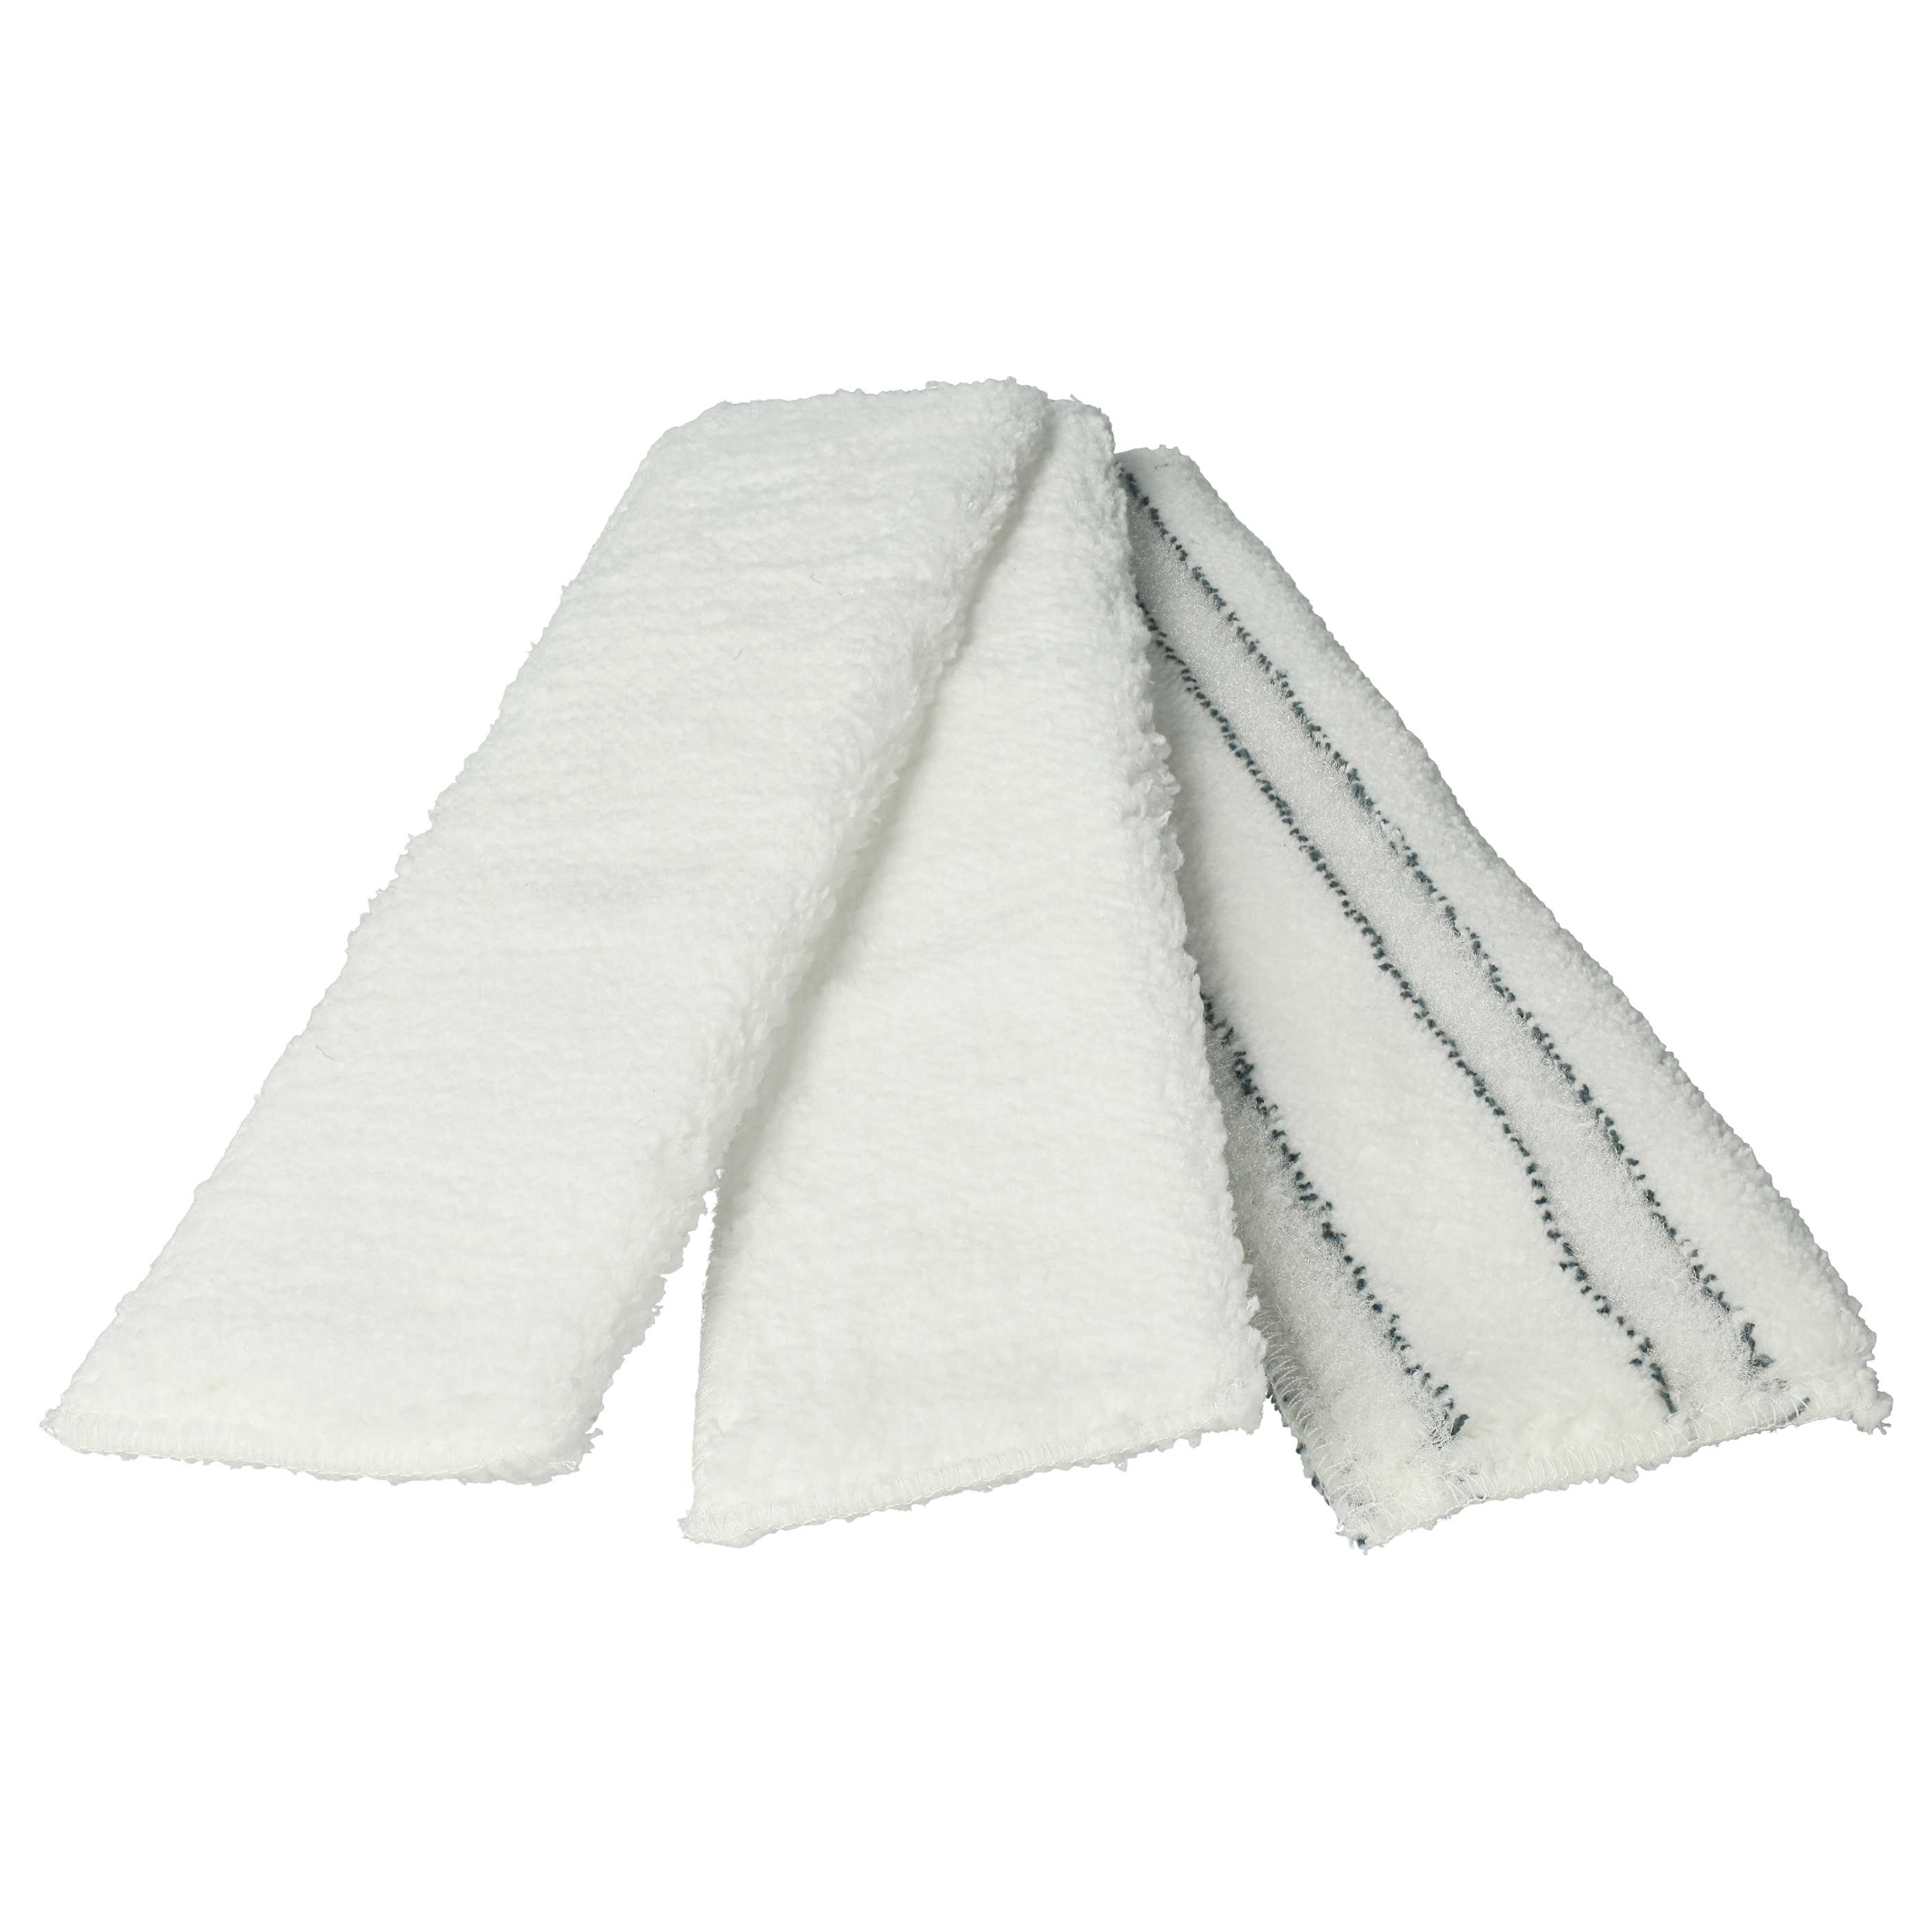  Cleaning Cloth Set (6 Part) replaces Thomas 787204 for Vacuum Cleaner - microfibre